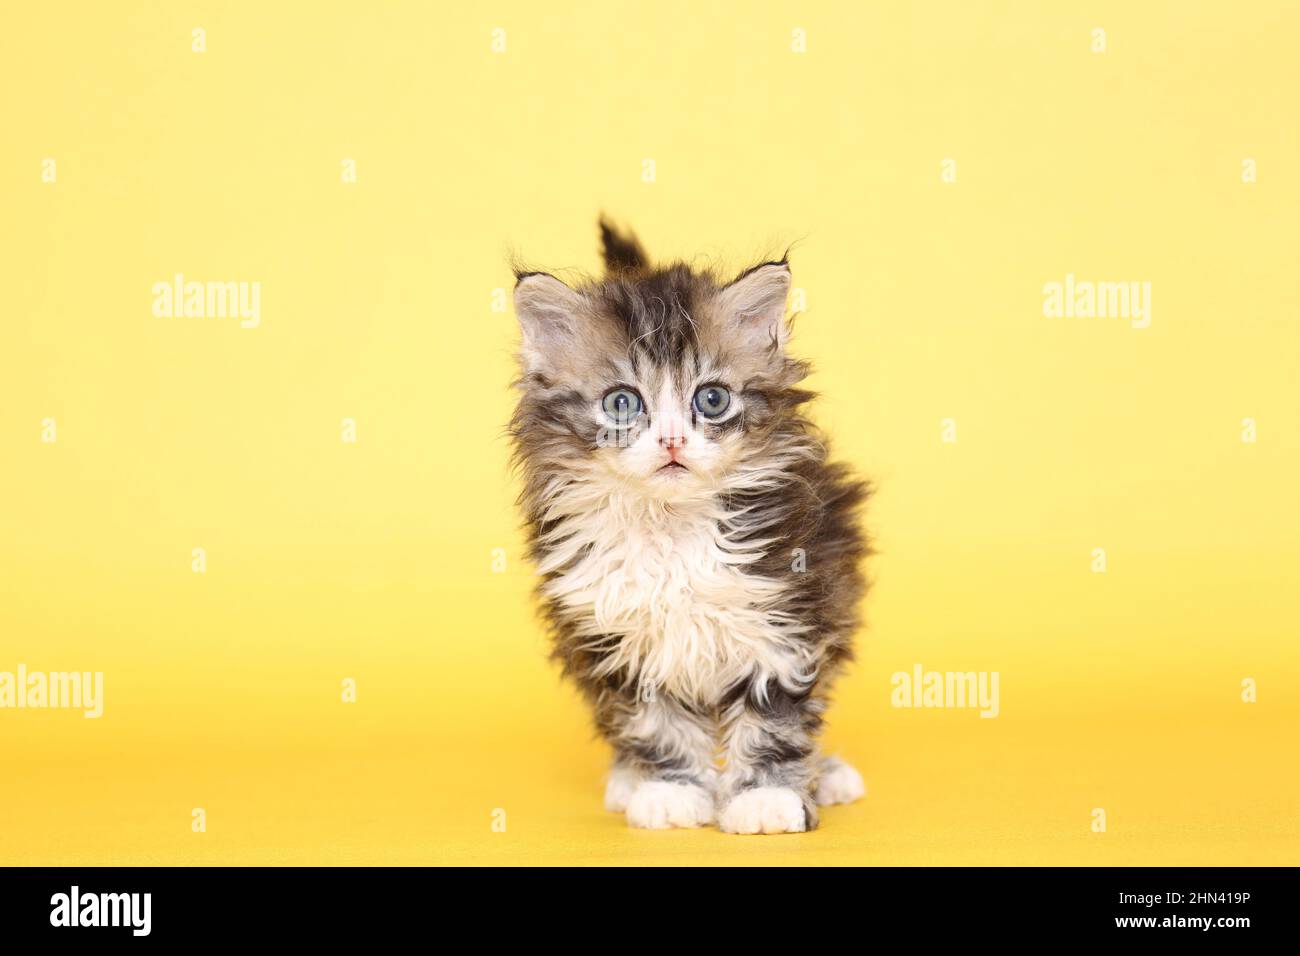 Selkirk Rex. Kitten standing. Studio picture against a yellow background. Germany Stock Photo